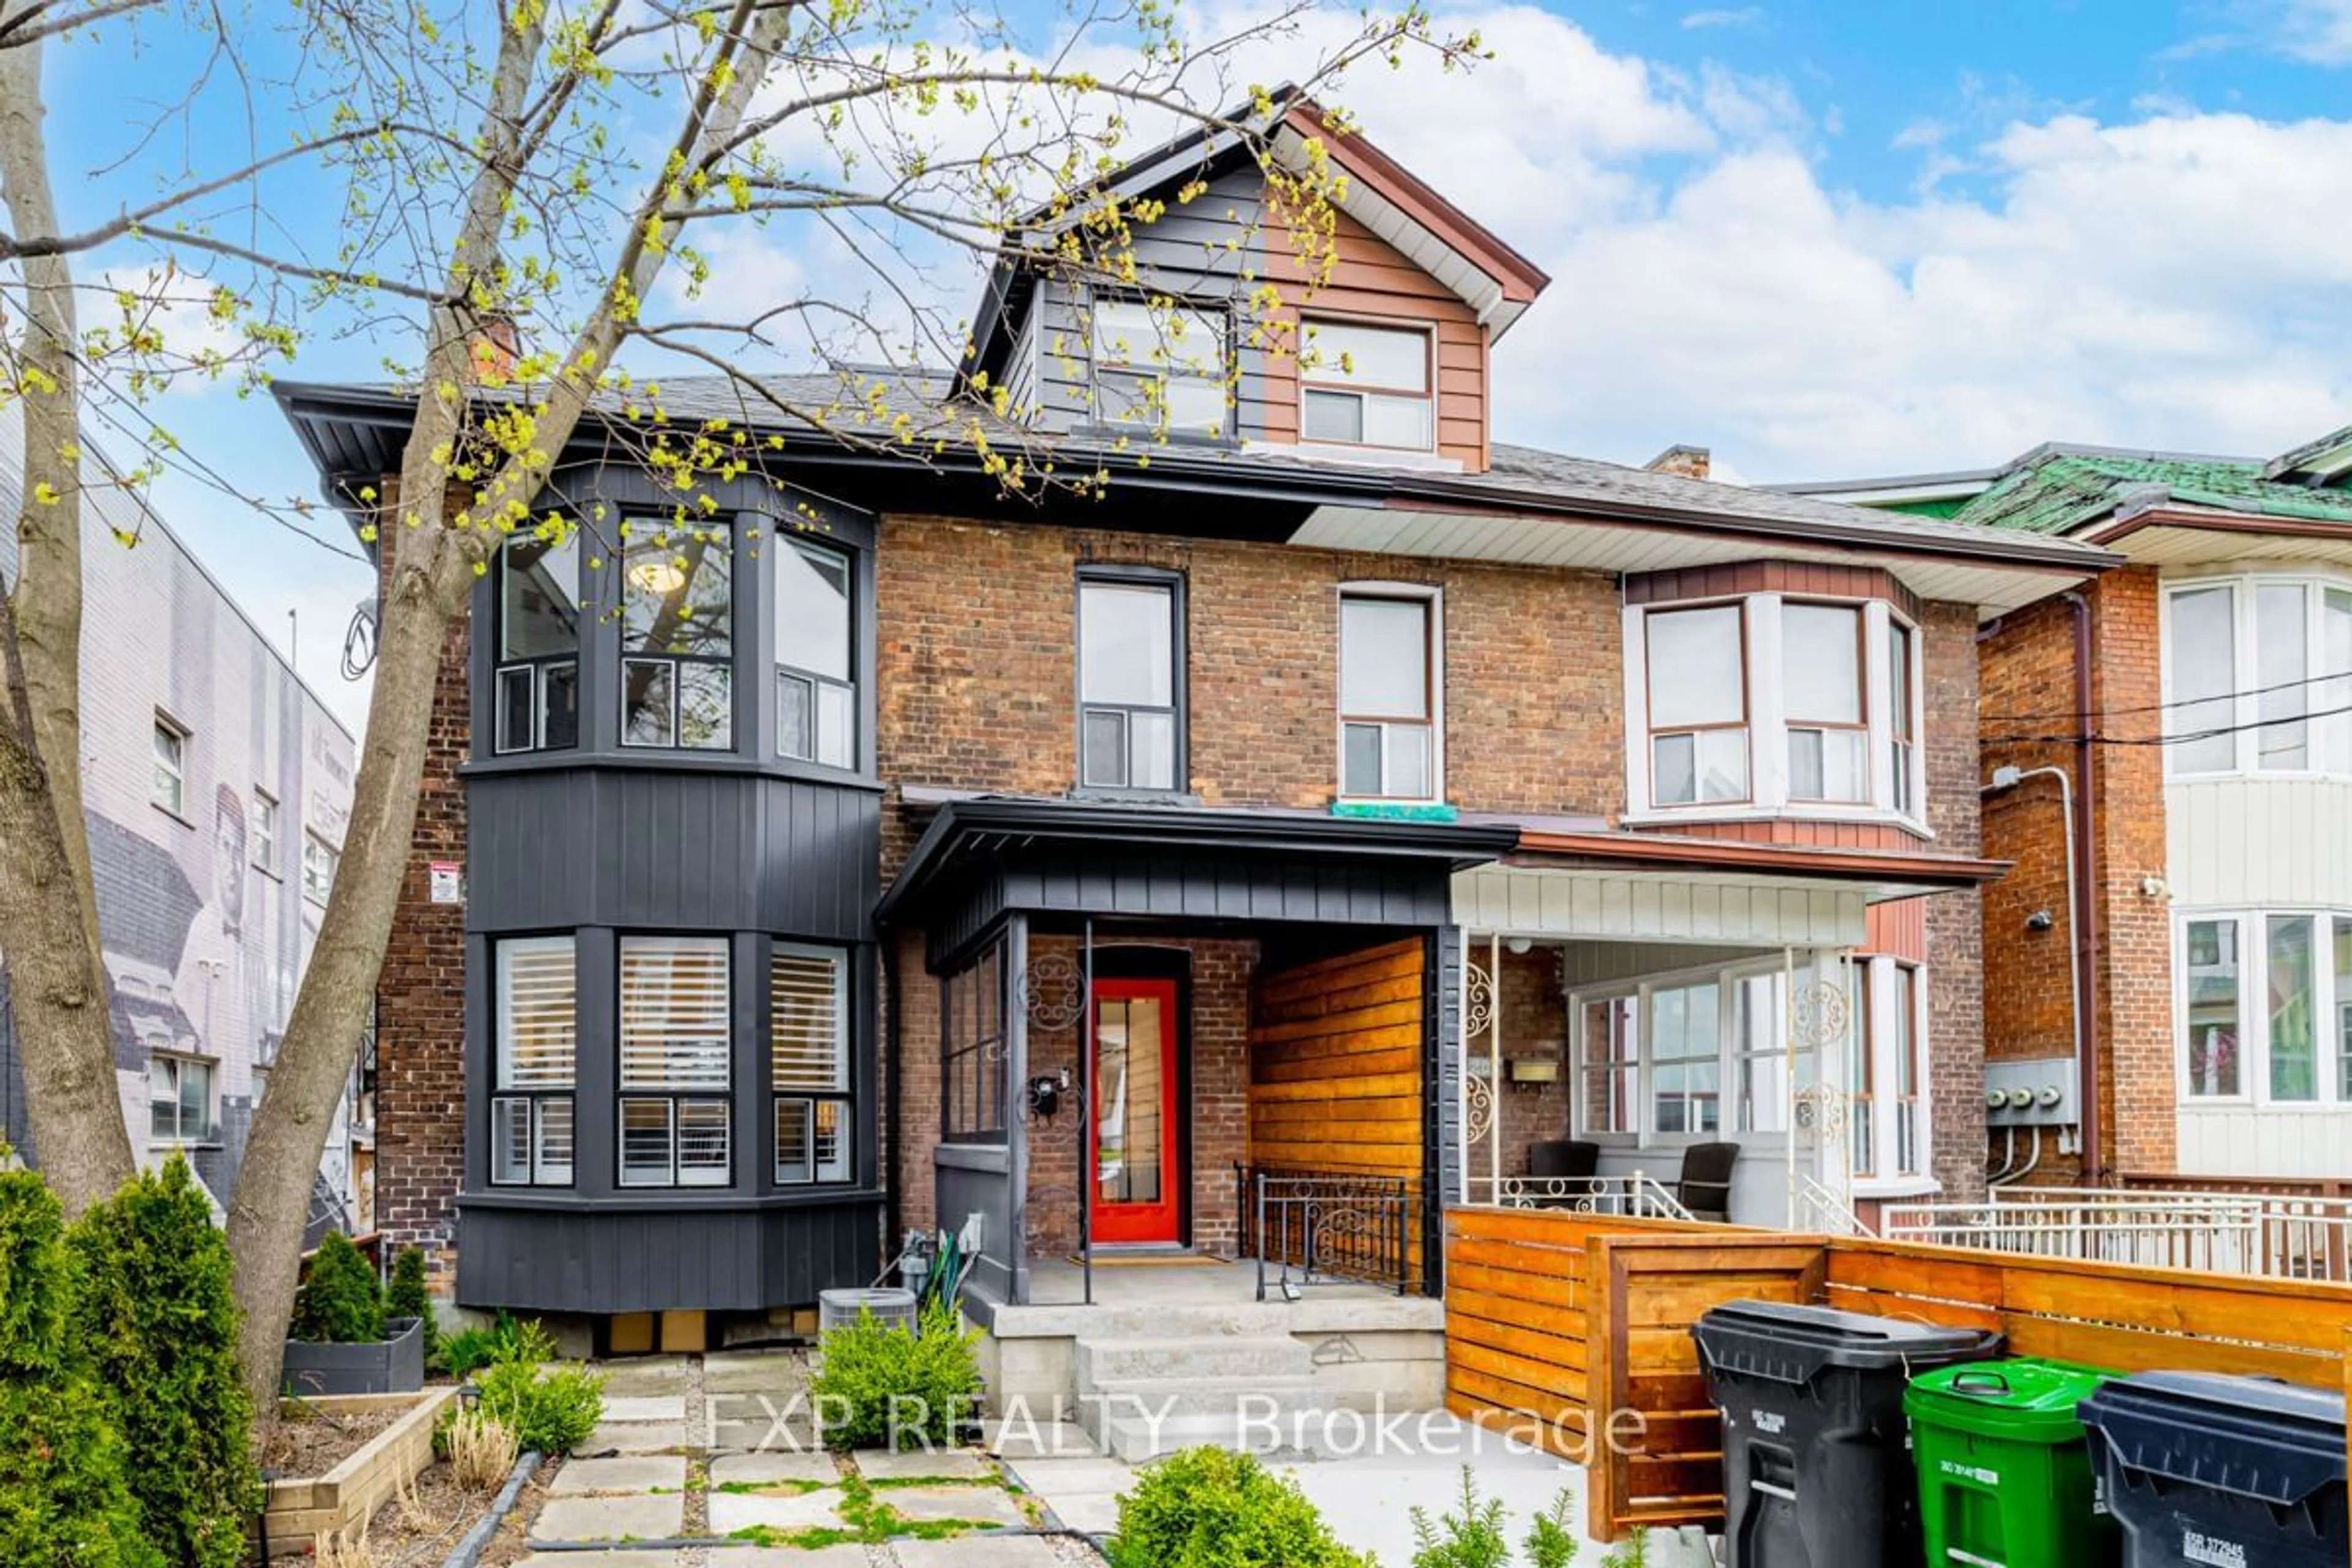 Home with brick exterior material for 204 Montrose Ave, Toronto Ontario M6G 3G7